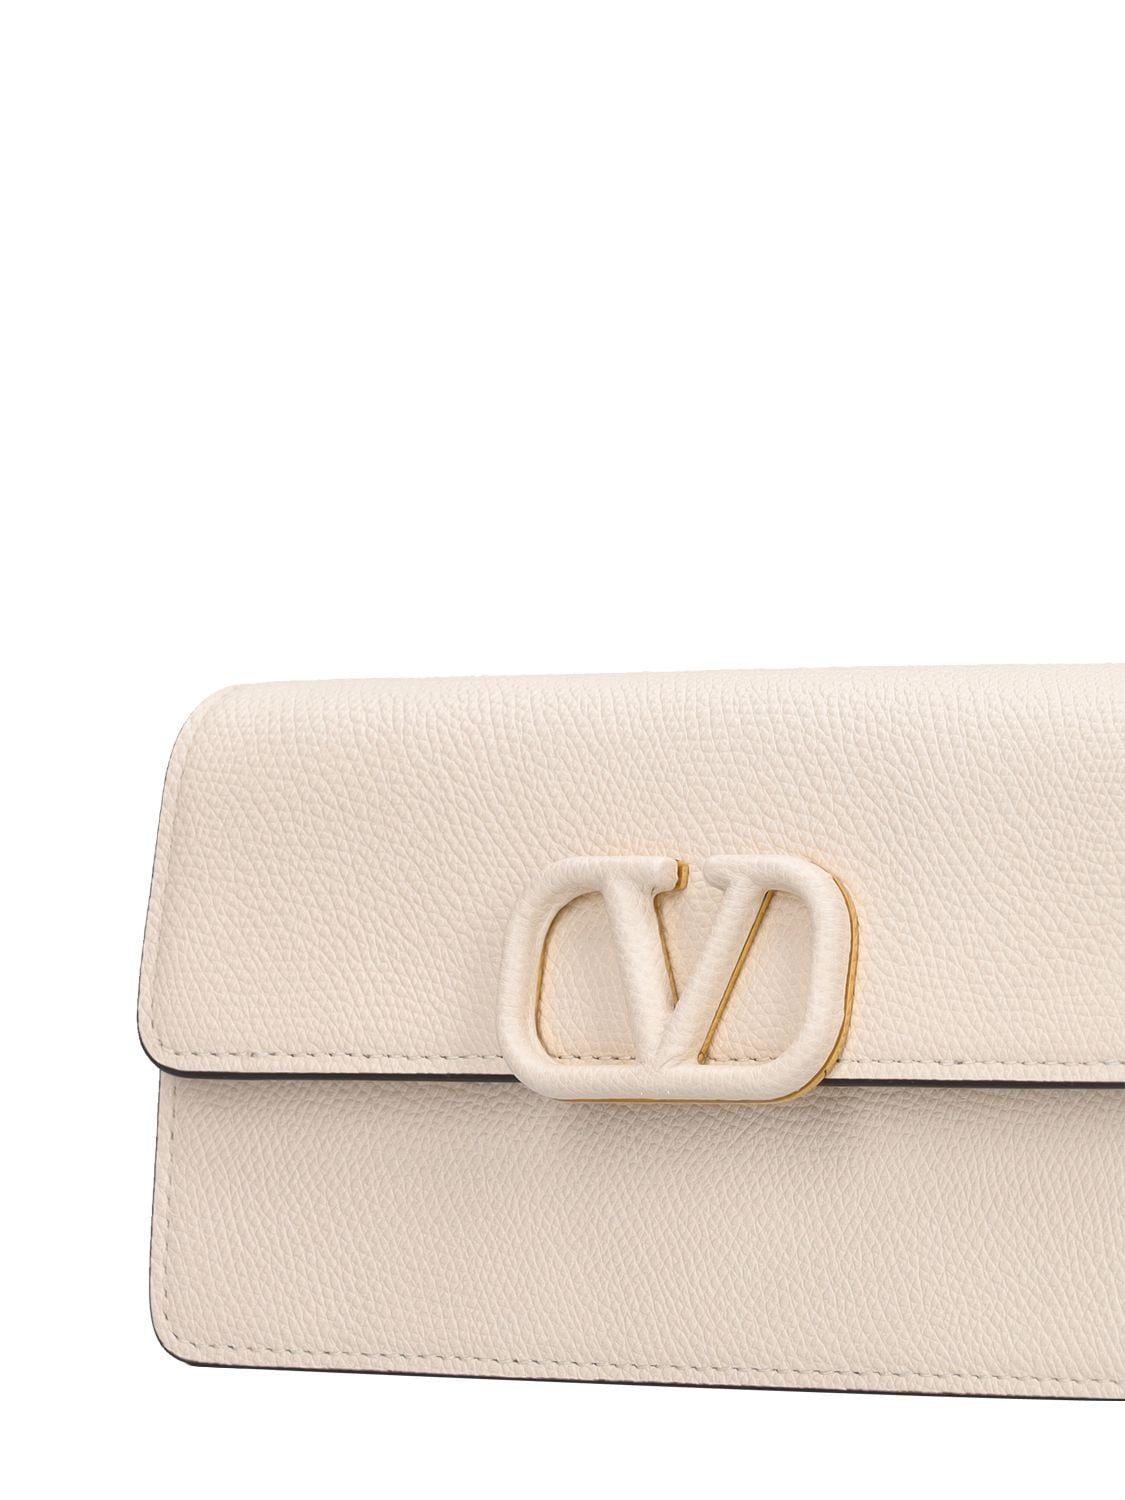 Shop Valentino Vlogo Leather Wallet W/chain In Light Ivory